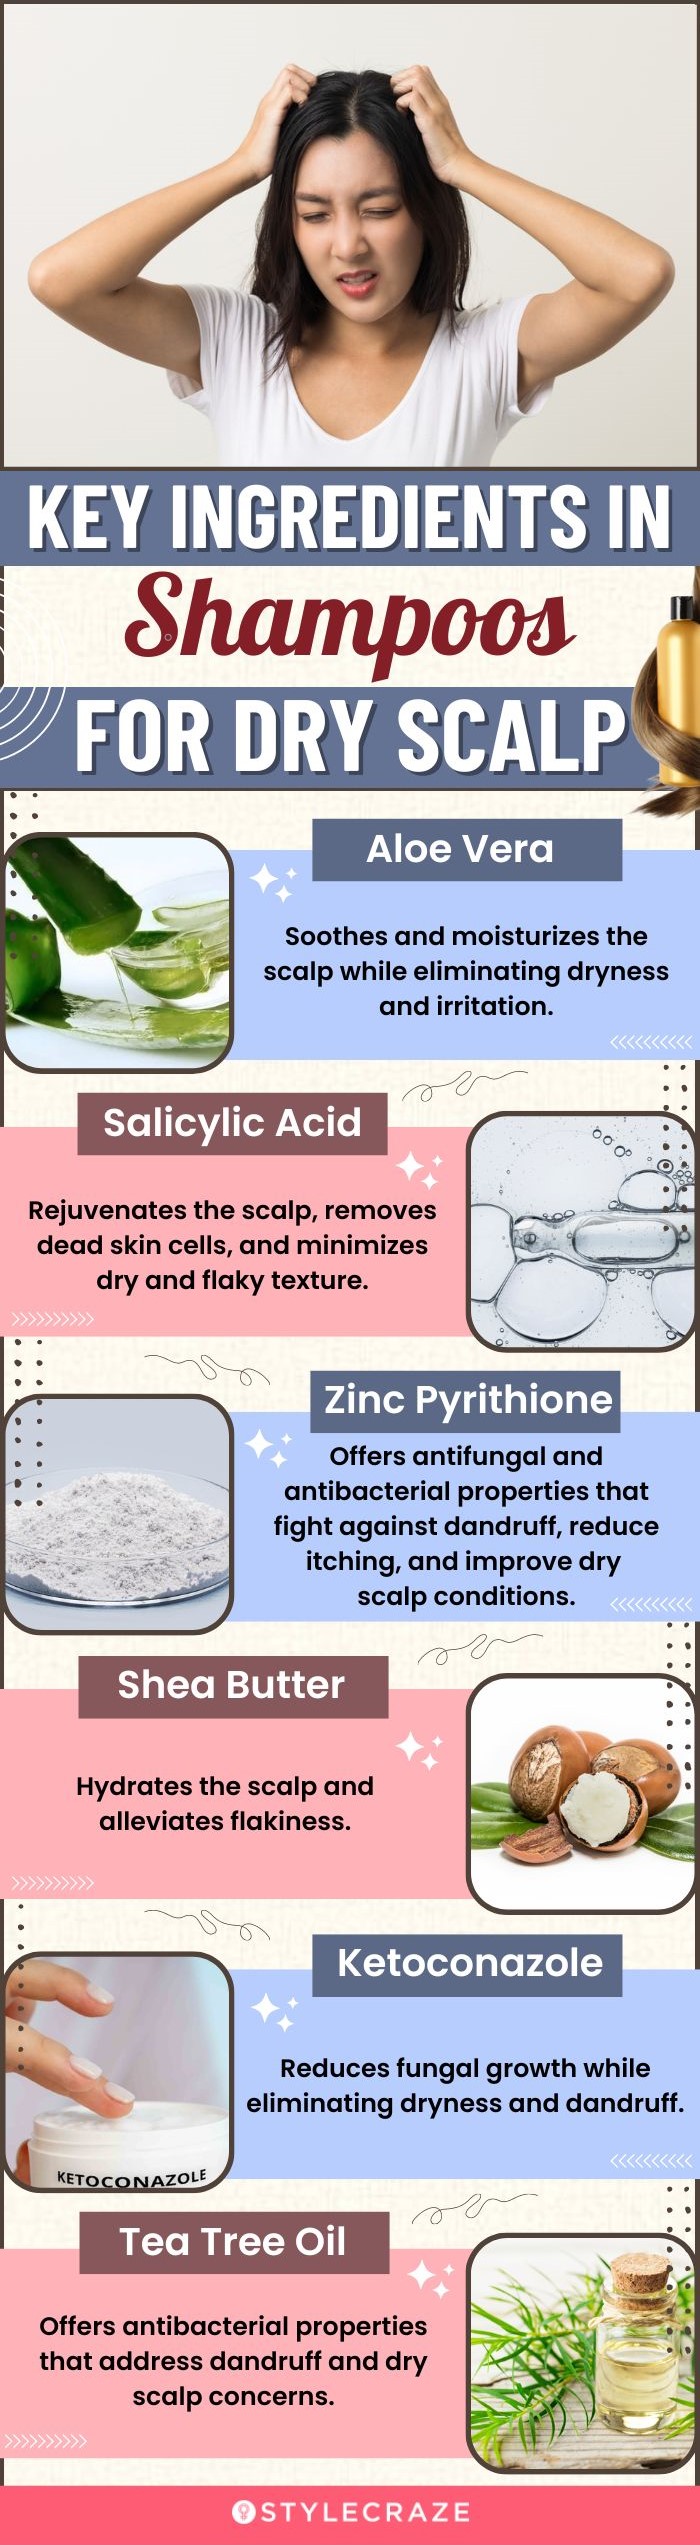 Key Ingredients In Shampoos For Dry Scalp (infographic)